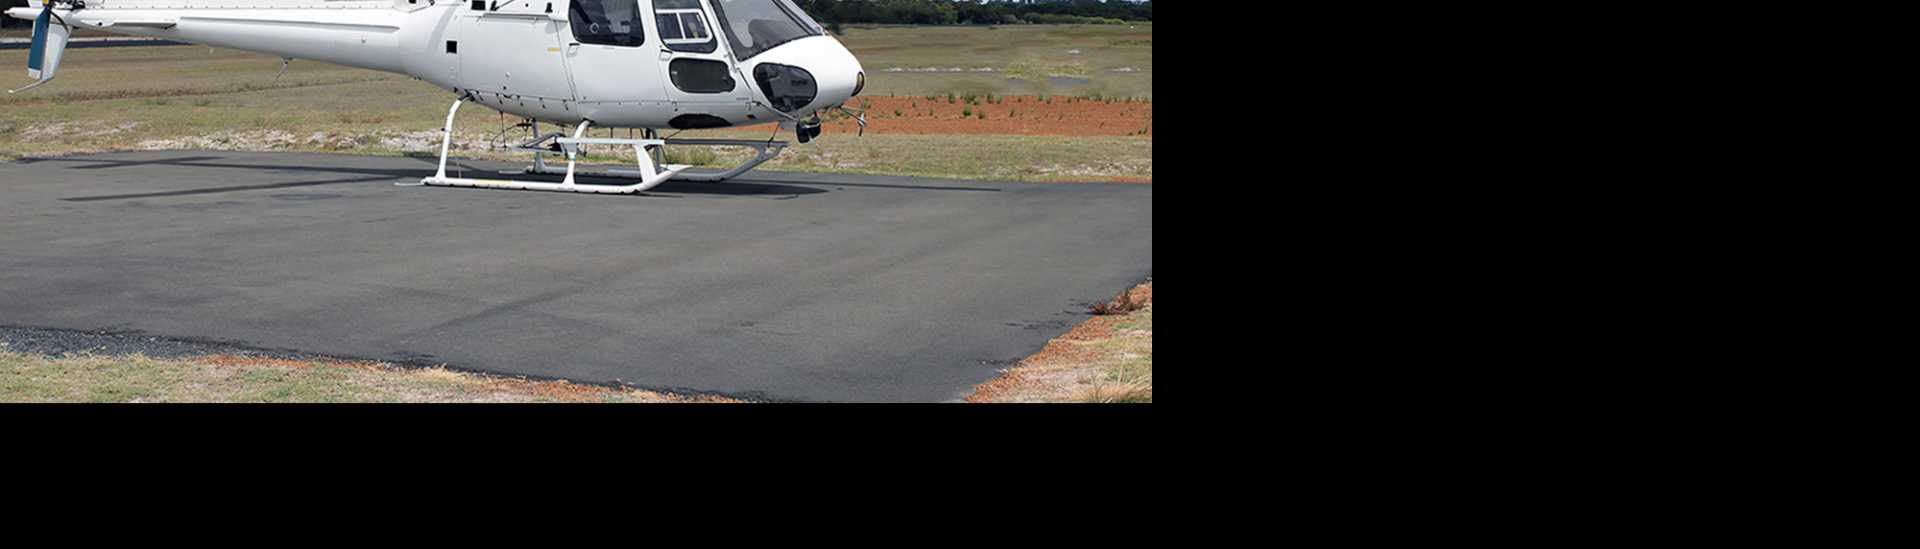 airwork helicopters for sale and lease.  bk117,as350, as355